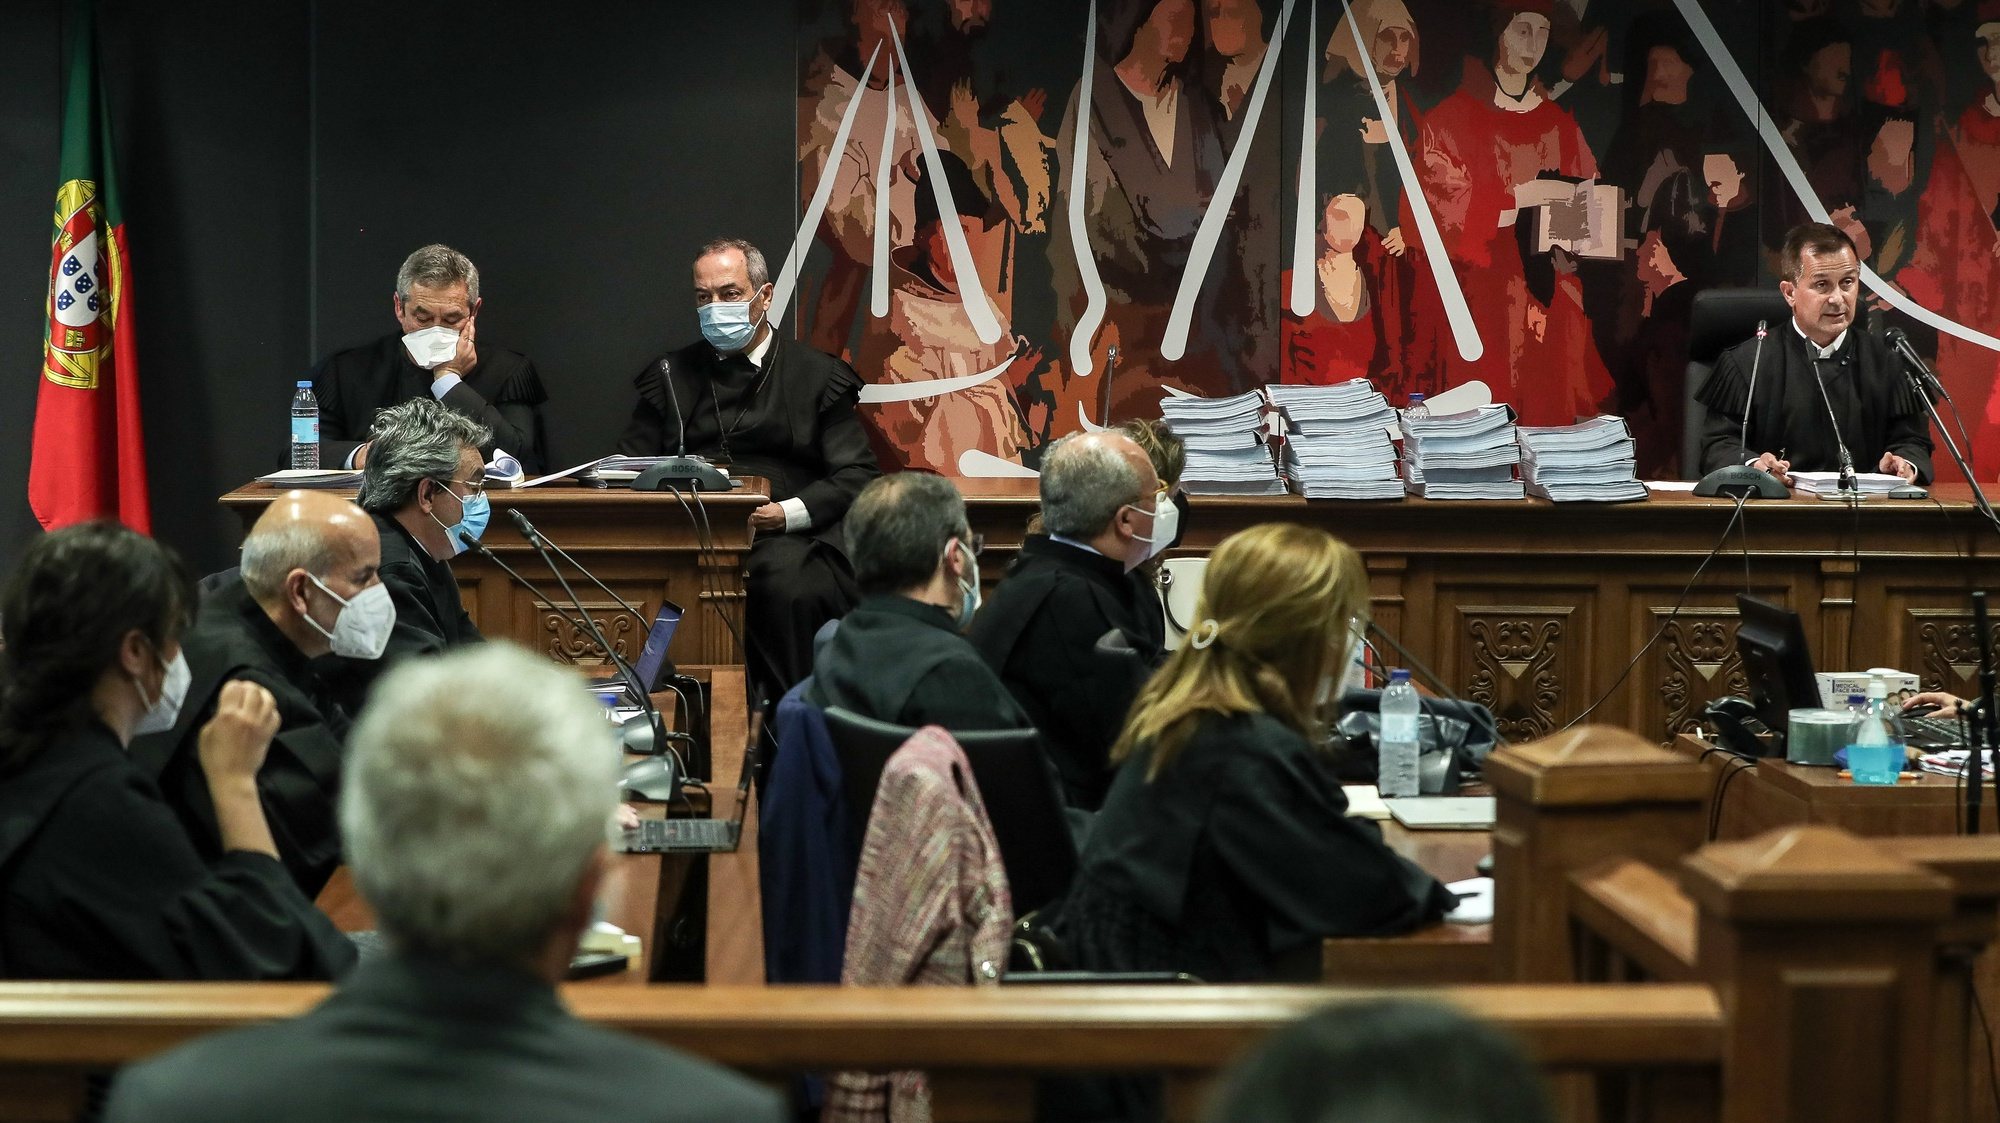 Judge Ivo Rosa (R) accompanied by the prosecutors Rosario Teixeira (L) and judge Carlos Alexandre (C) during  the instructional decision session of the high-profile corruption case known as Operation Marques, which involves the Portugal&#039;s former Prime Minister Jose Socrates,  at the Justice Campus in Lisbon, Portugal, 9 April 2021. Operation Marques has 28 defendants - 19 people and 9 companies - including former Prime Minister Jose Socrates, banker Ricardo Salgado, businessman and friend of Socrates Carlos Santos Silva and senior staff of Portugal Telecom and is related to crimes of corruption, active and passive, money laundering, document forgery and tax fraud. MARIO CRUZ / POOL/ LUSA